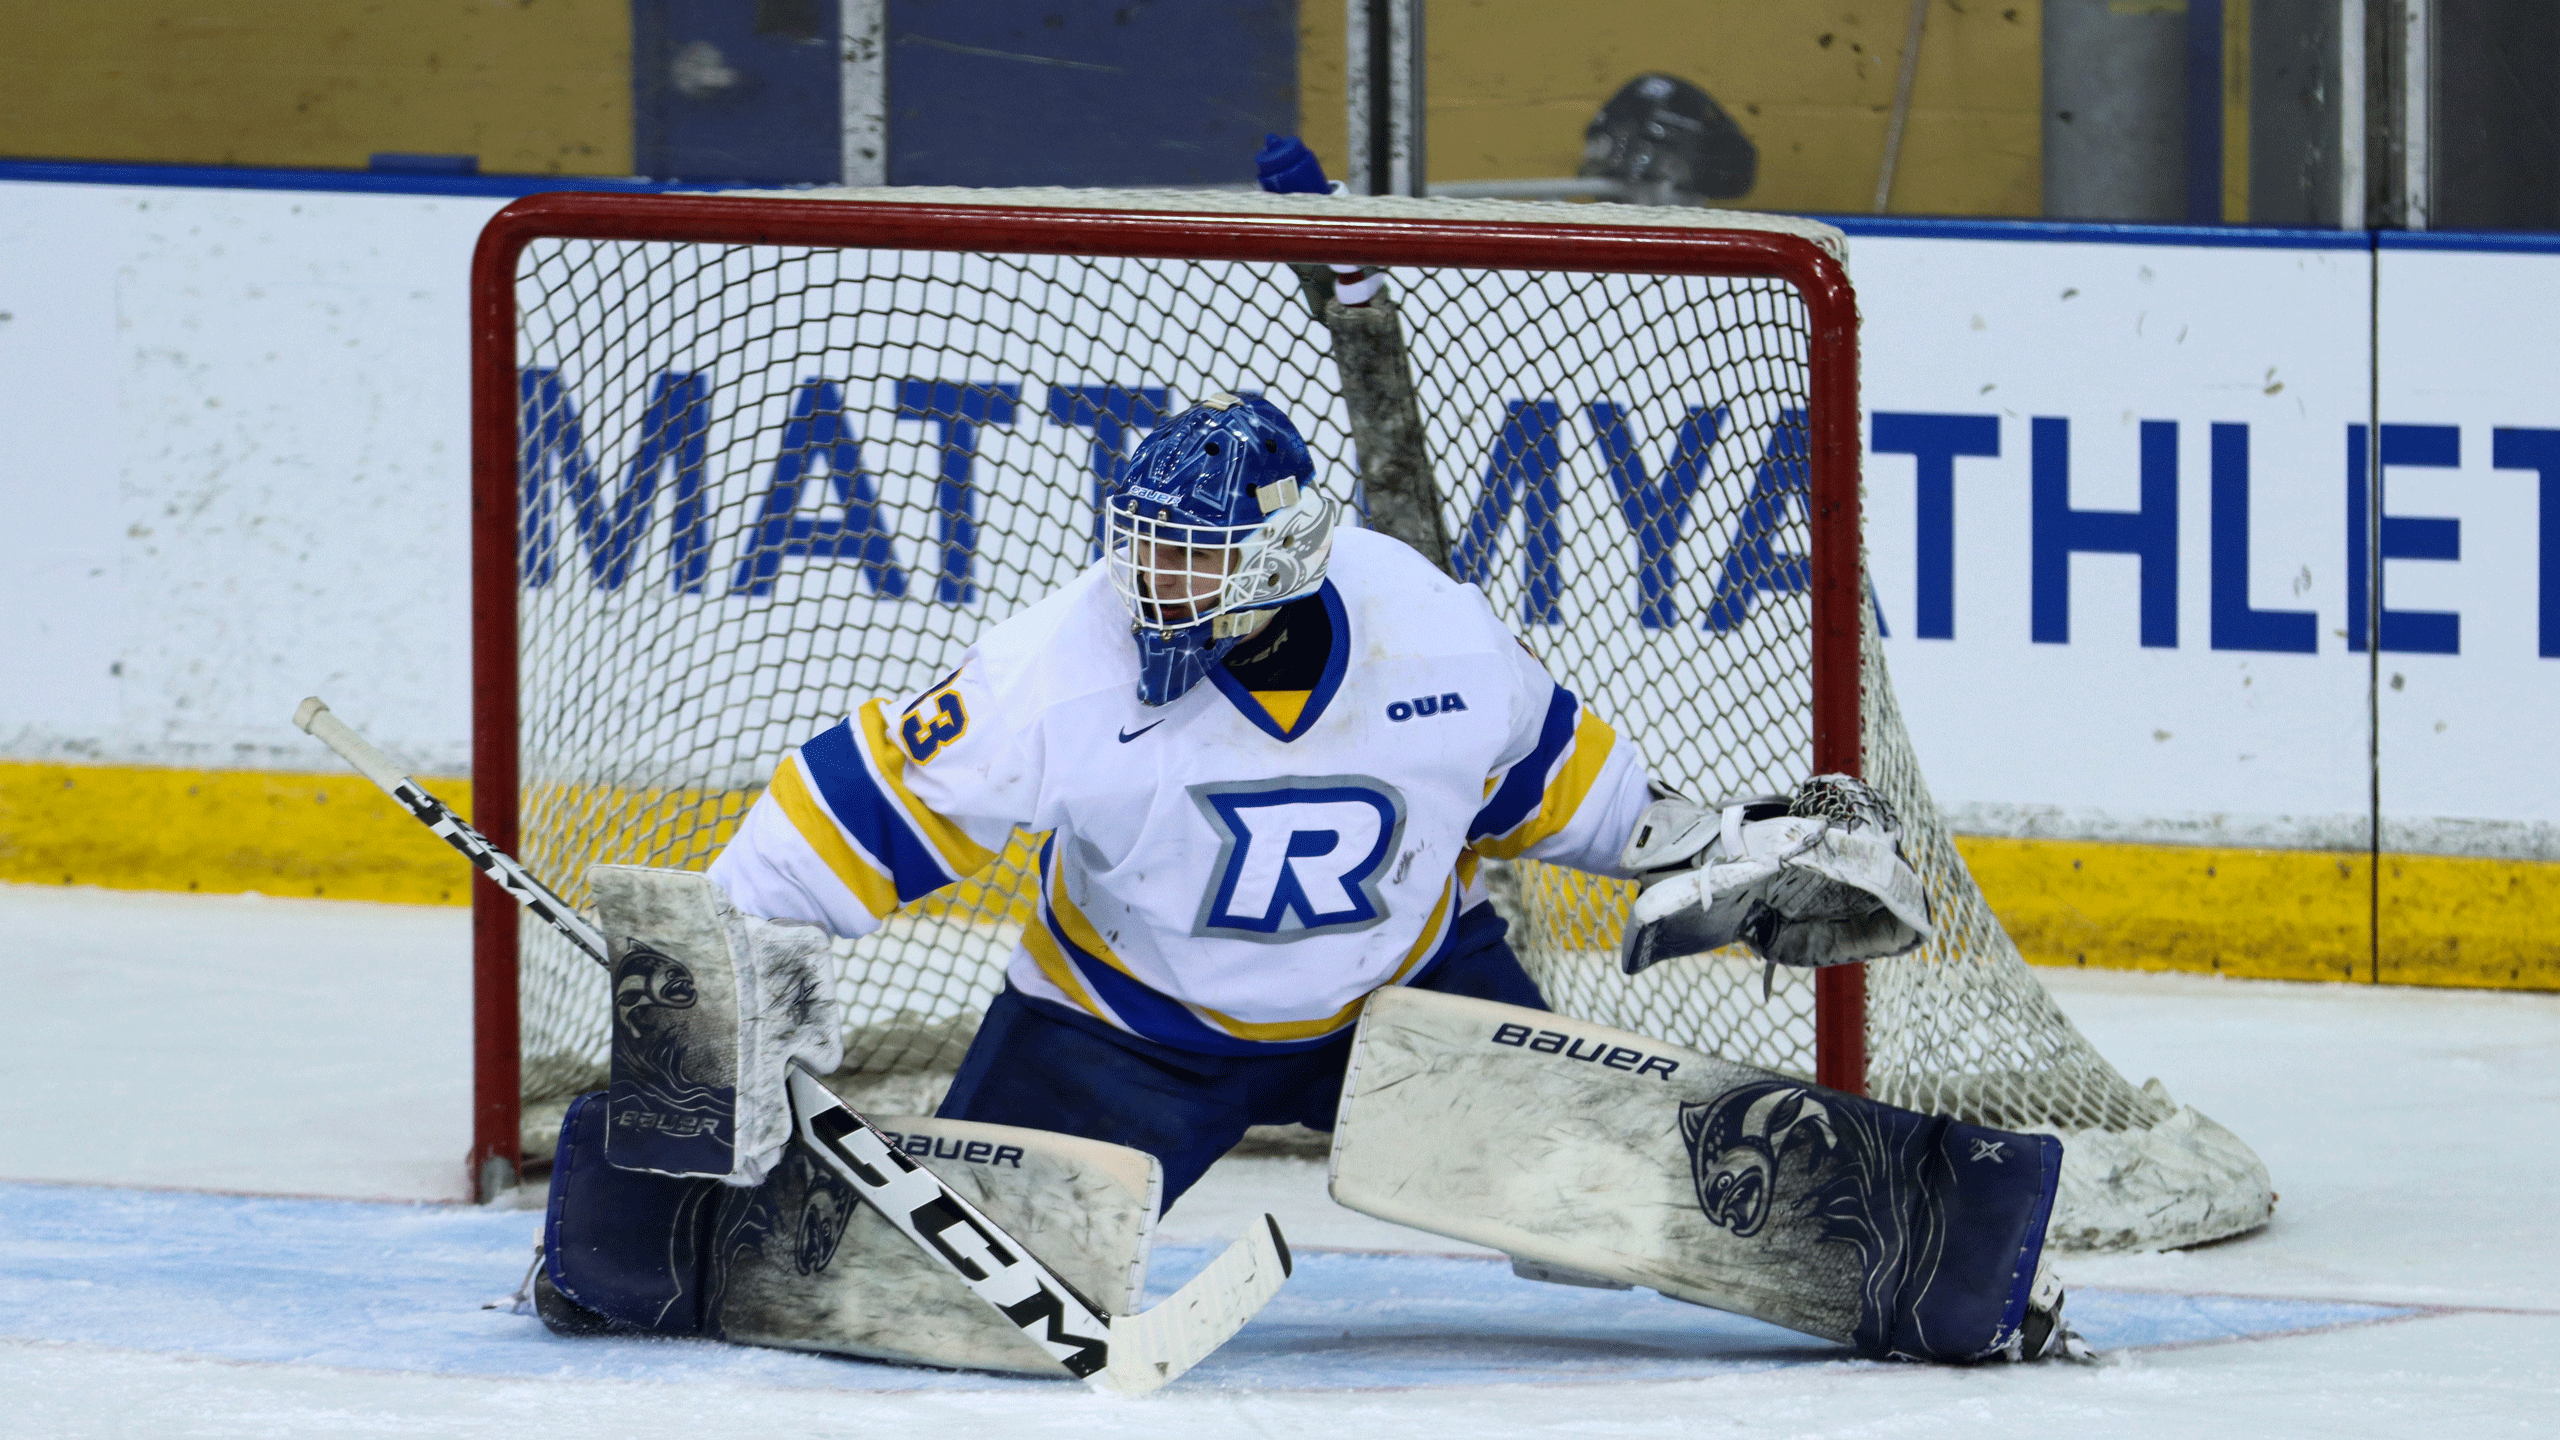 A hockey goalie in a white jersey skates across the ice